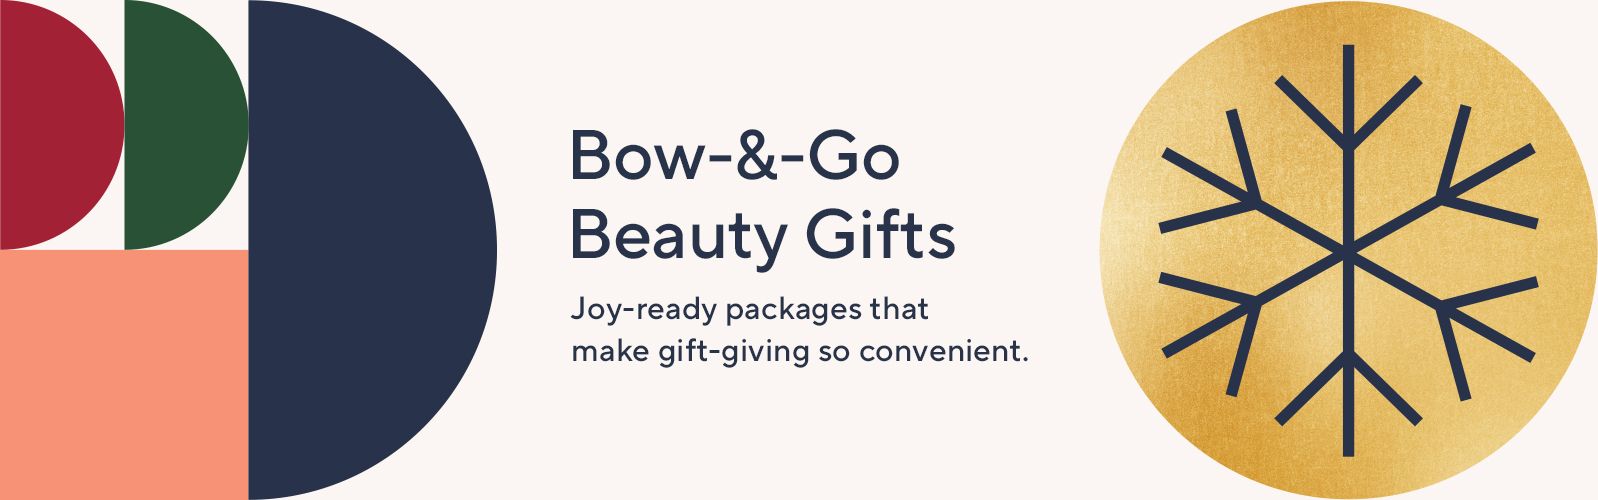 Bow-&-Go Beauty Gifts -  Joy-ready packages that make gift-giving so convenient. 